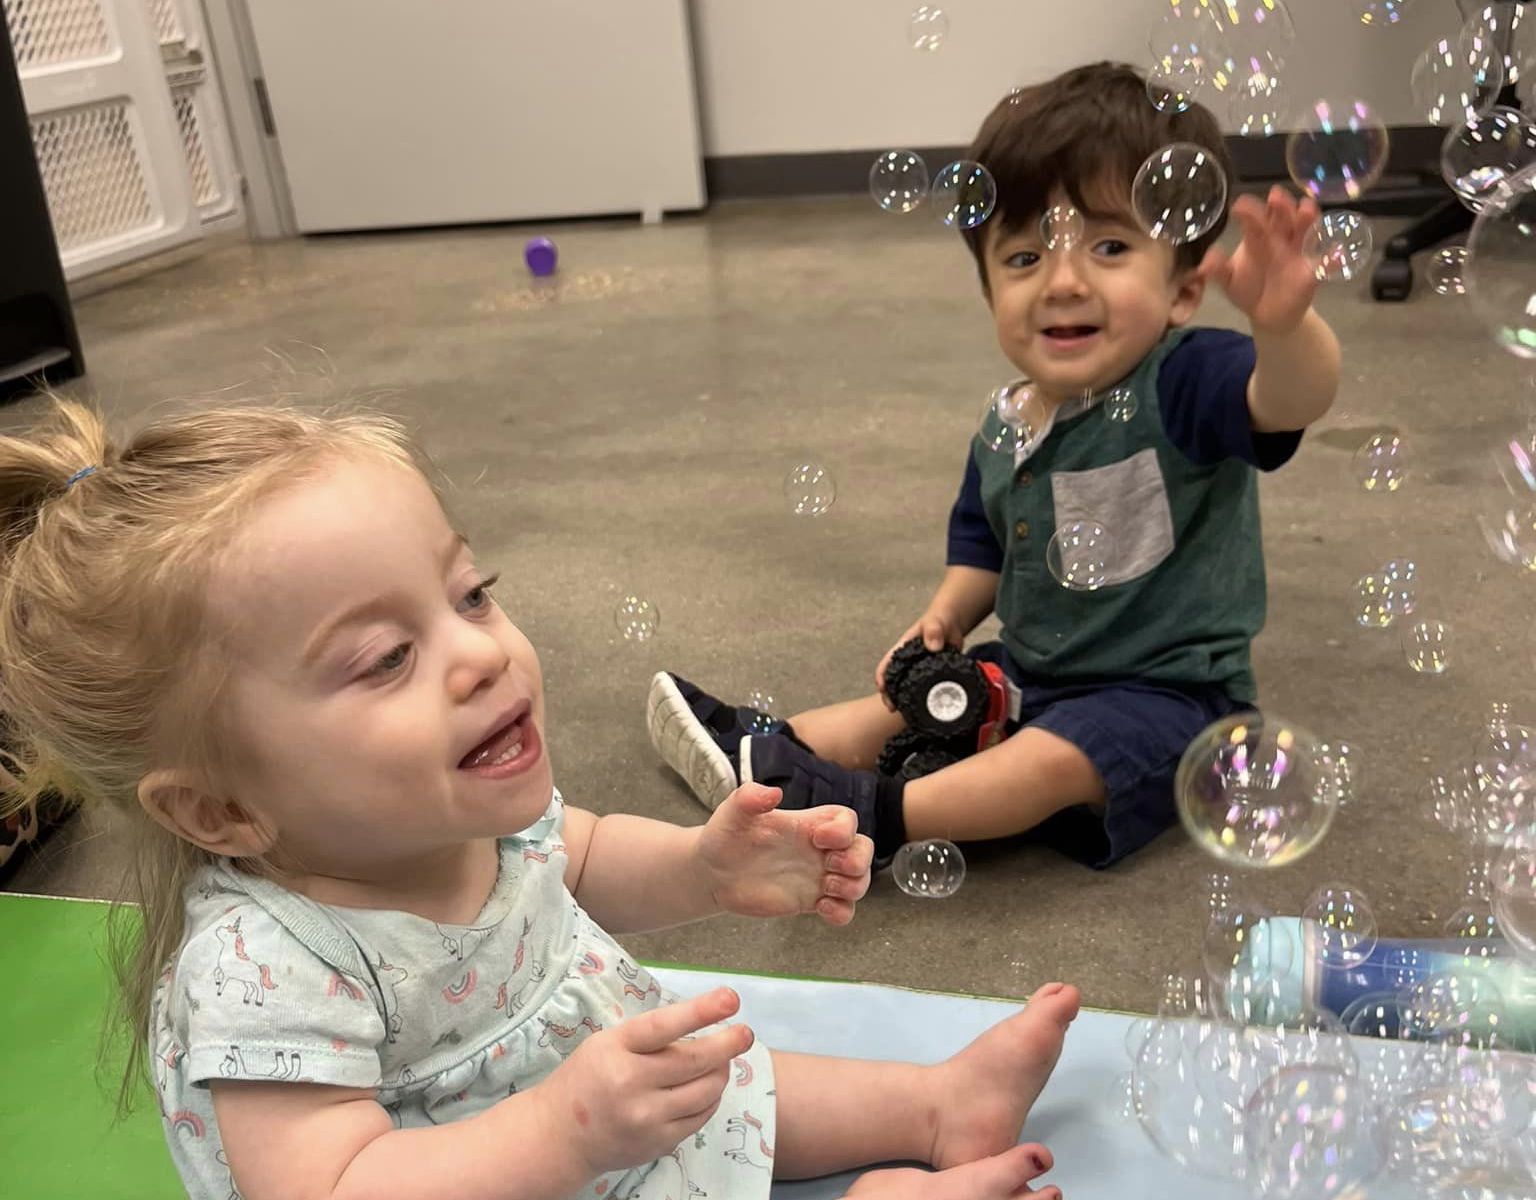 Playing together with bubbles at a child care for a disabled child